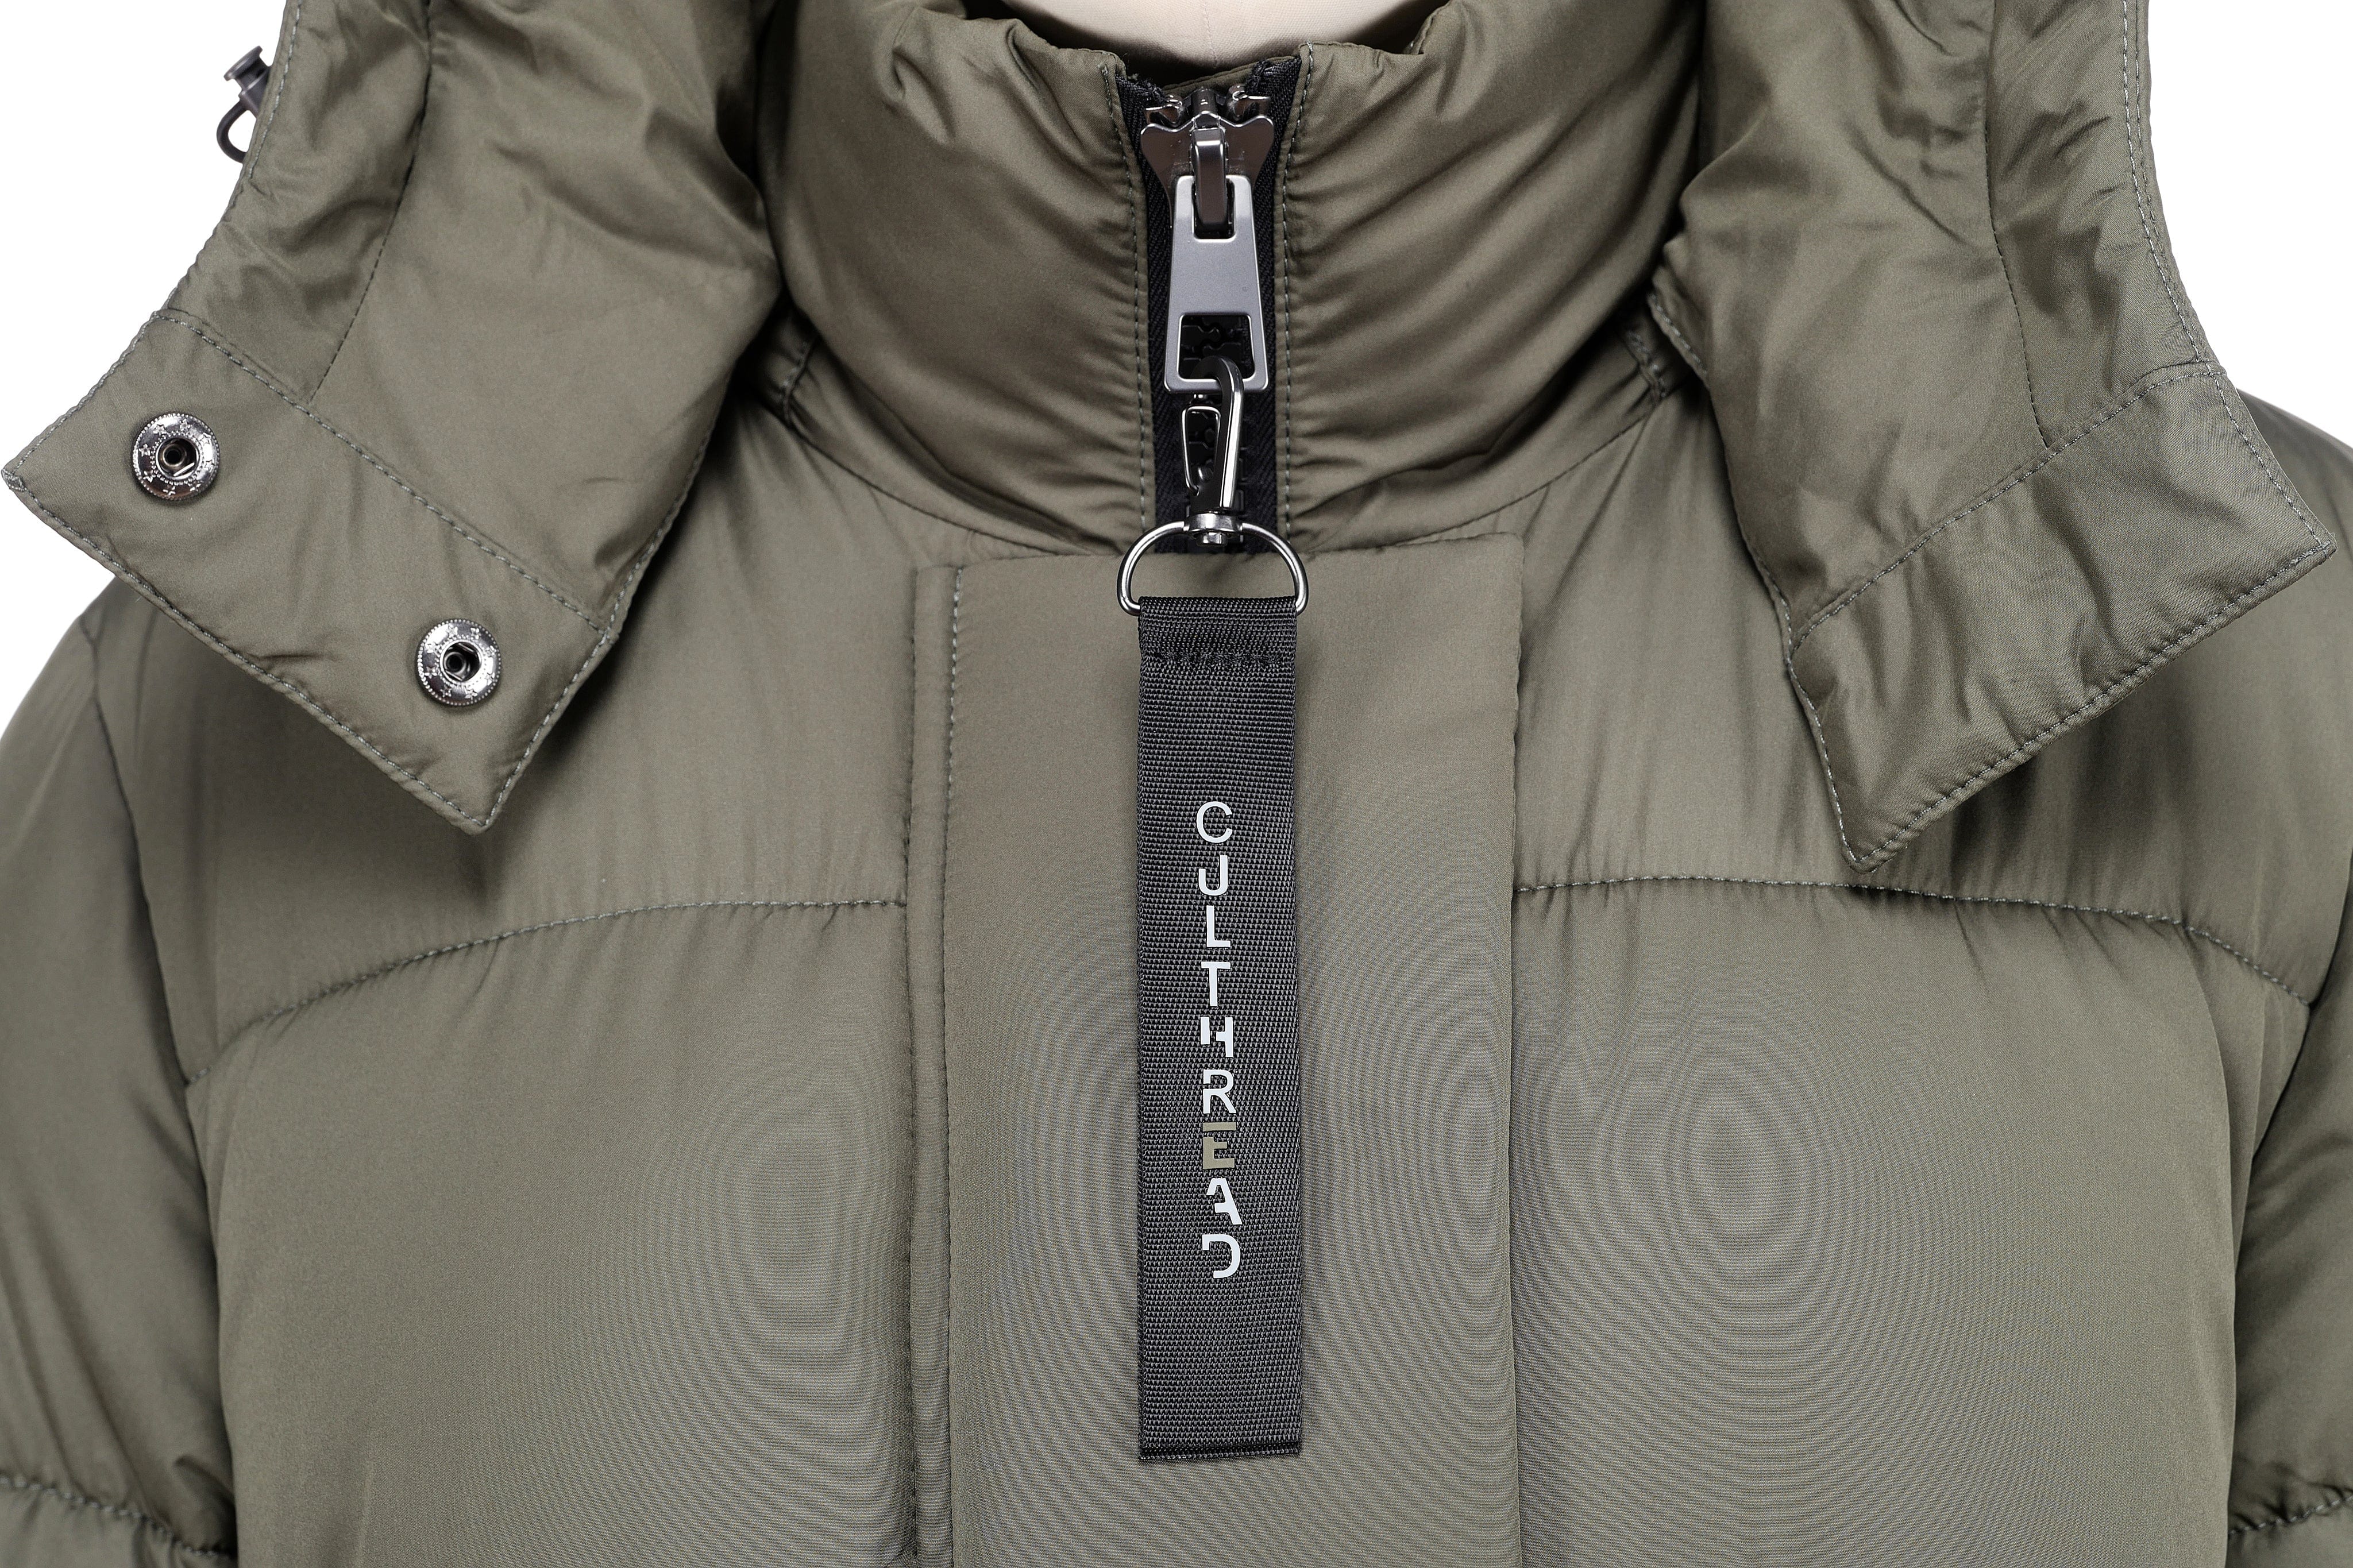 CULTHREAD COLVILLE II olive green puffer jacket